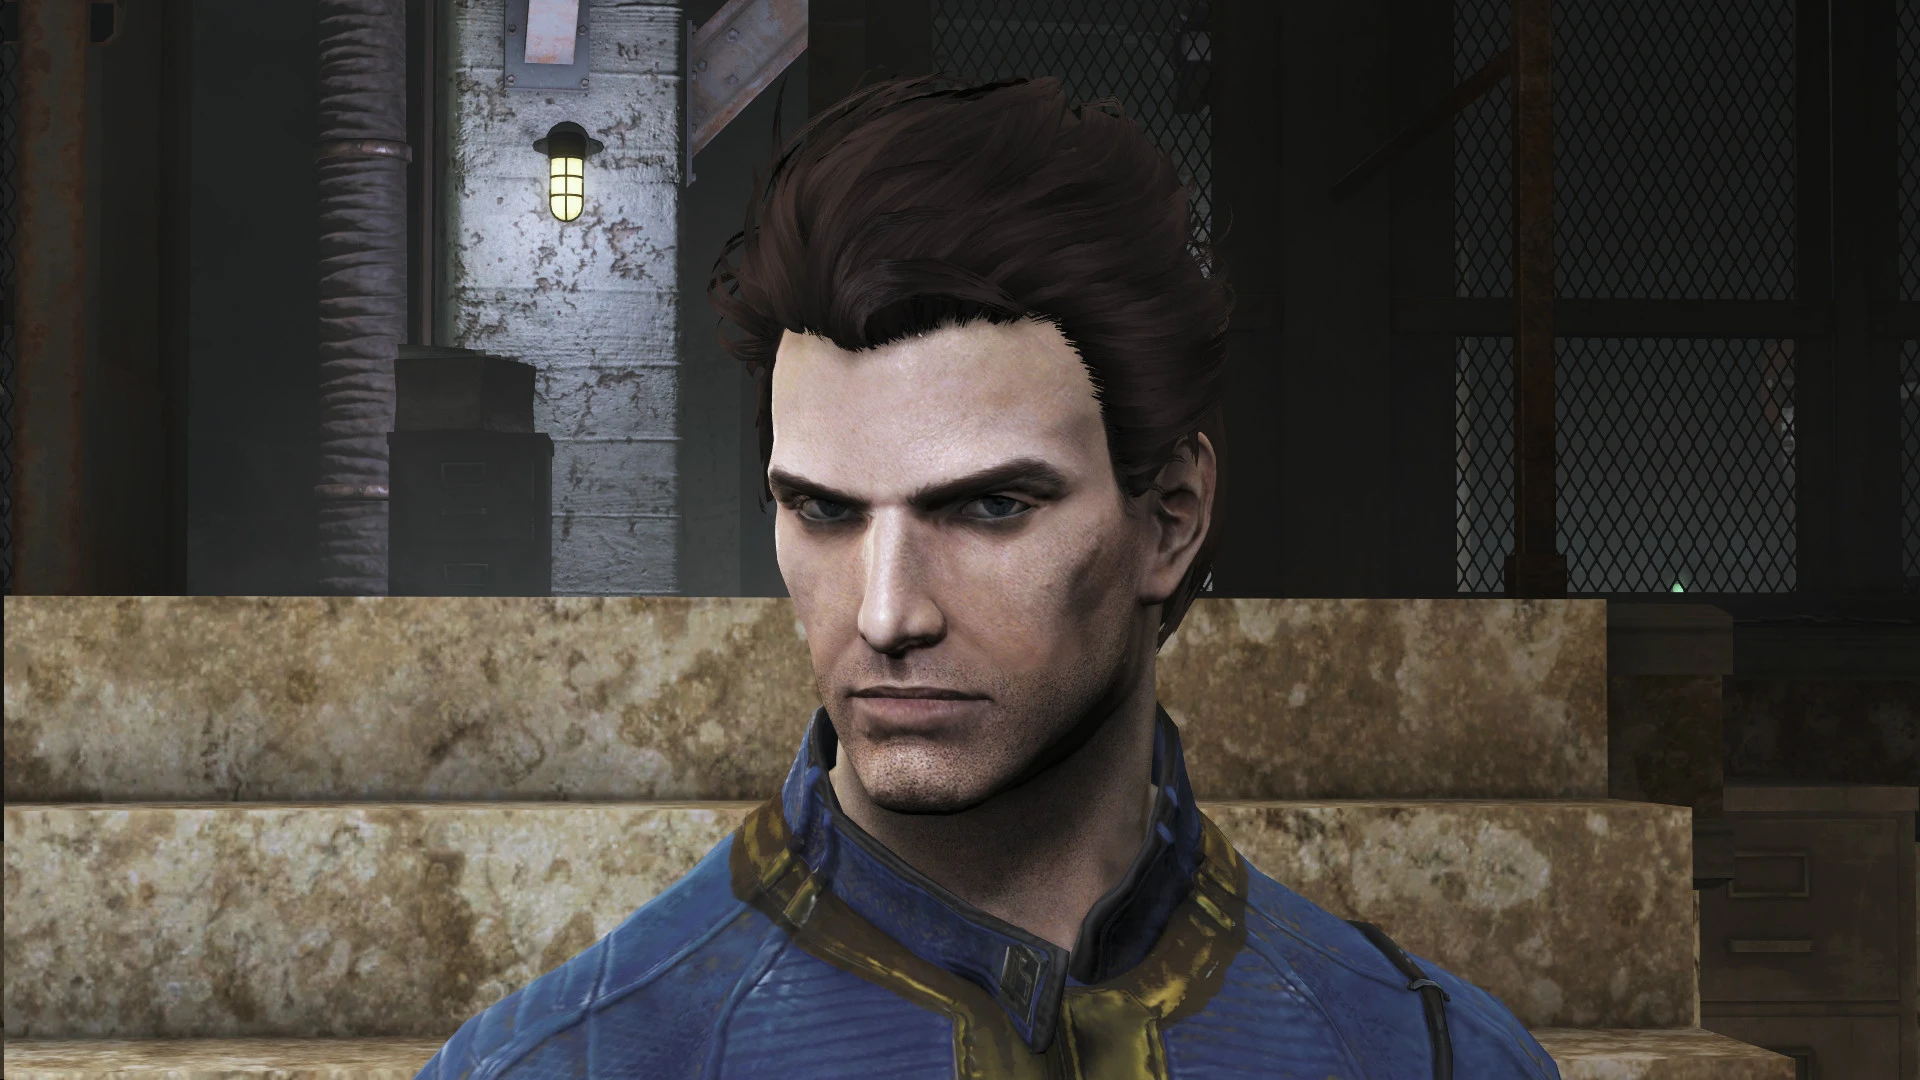 fallout 4 male hair mods